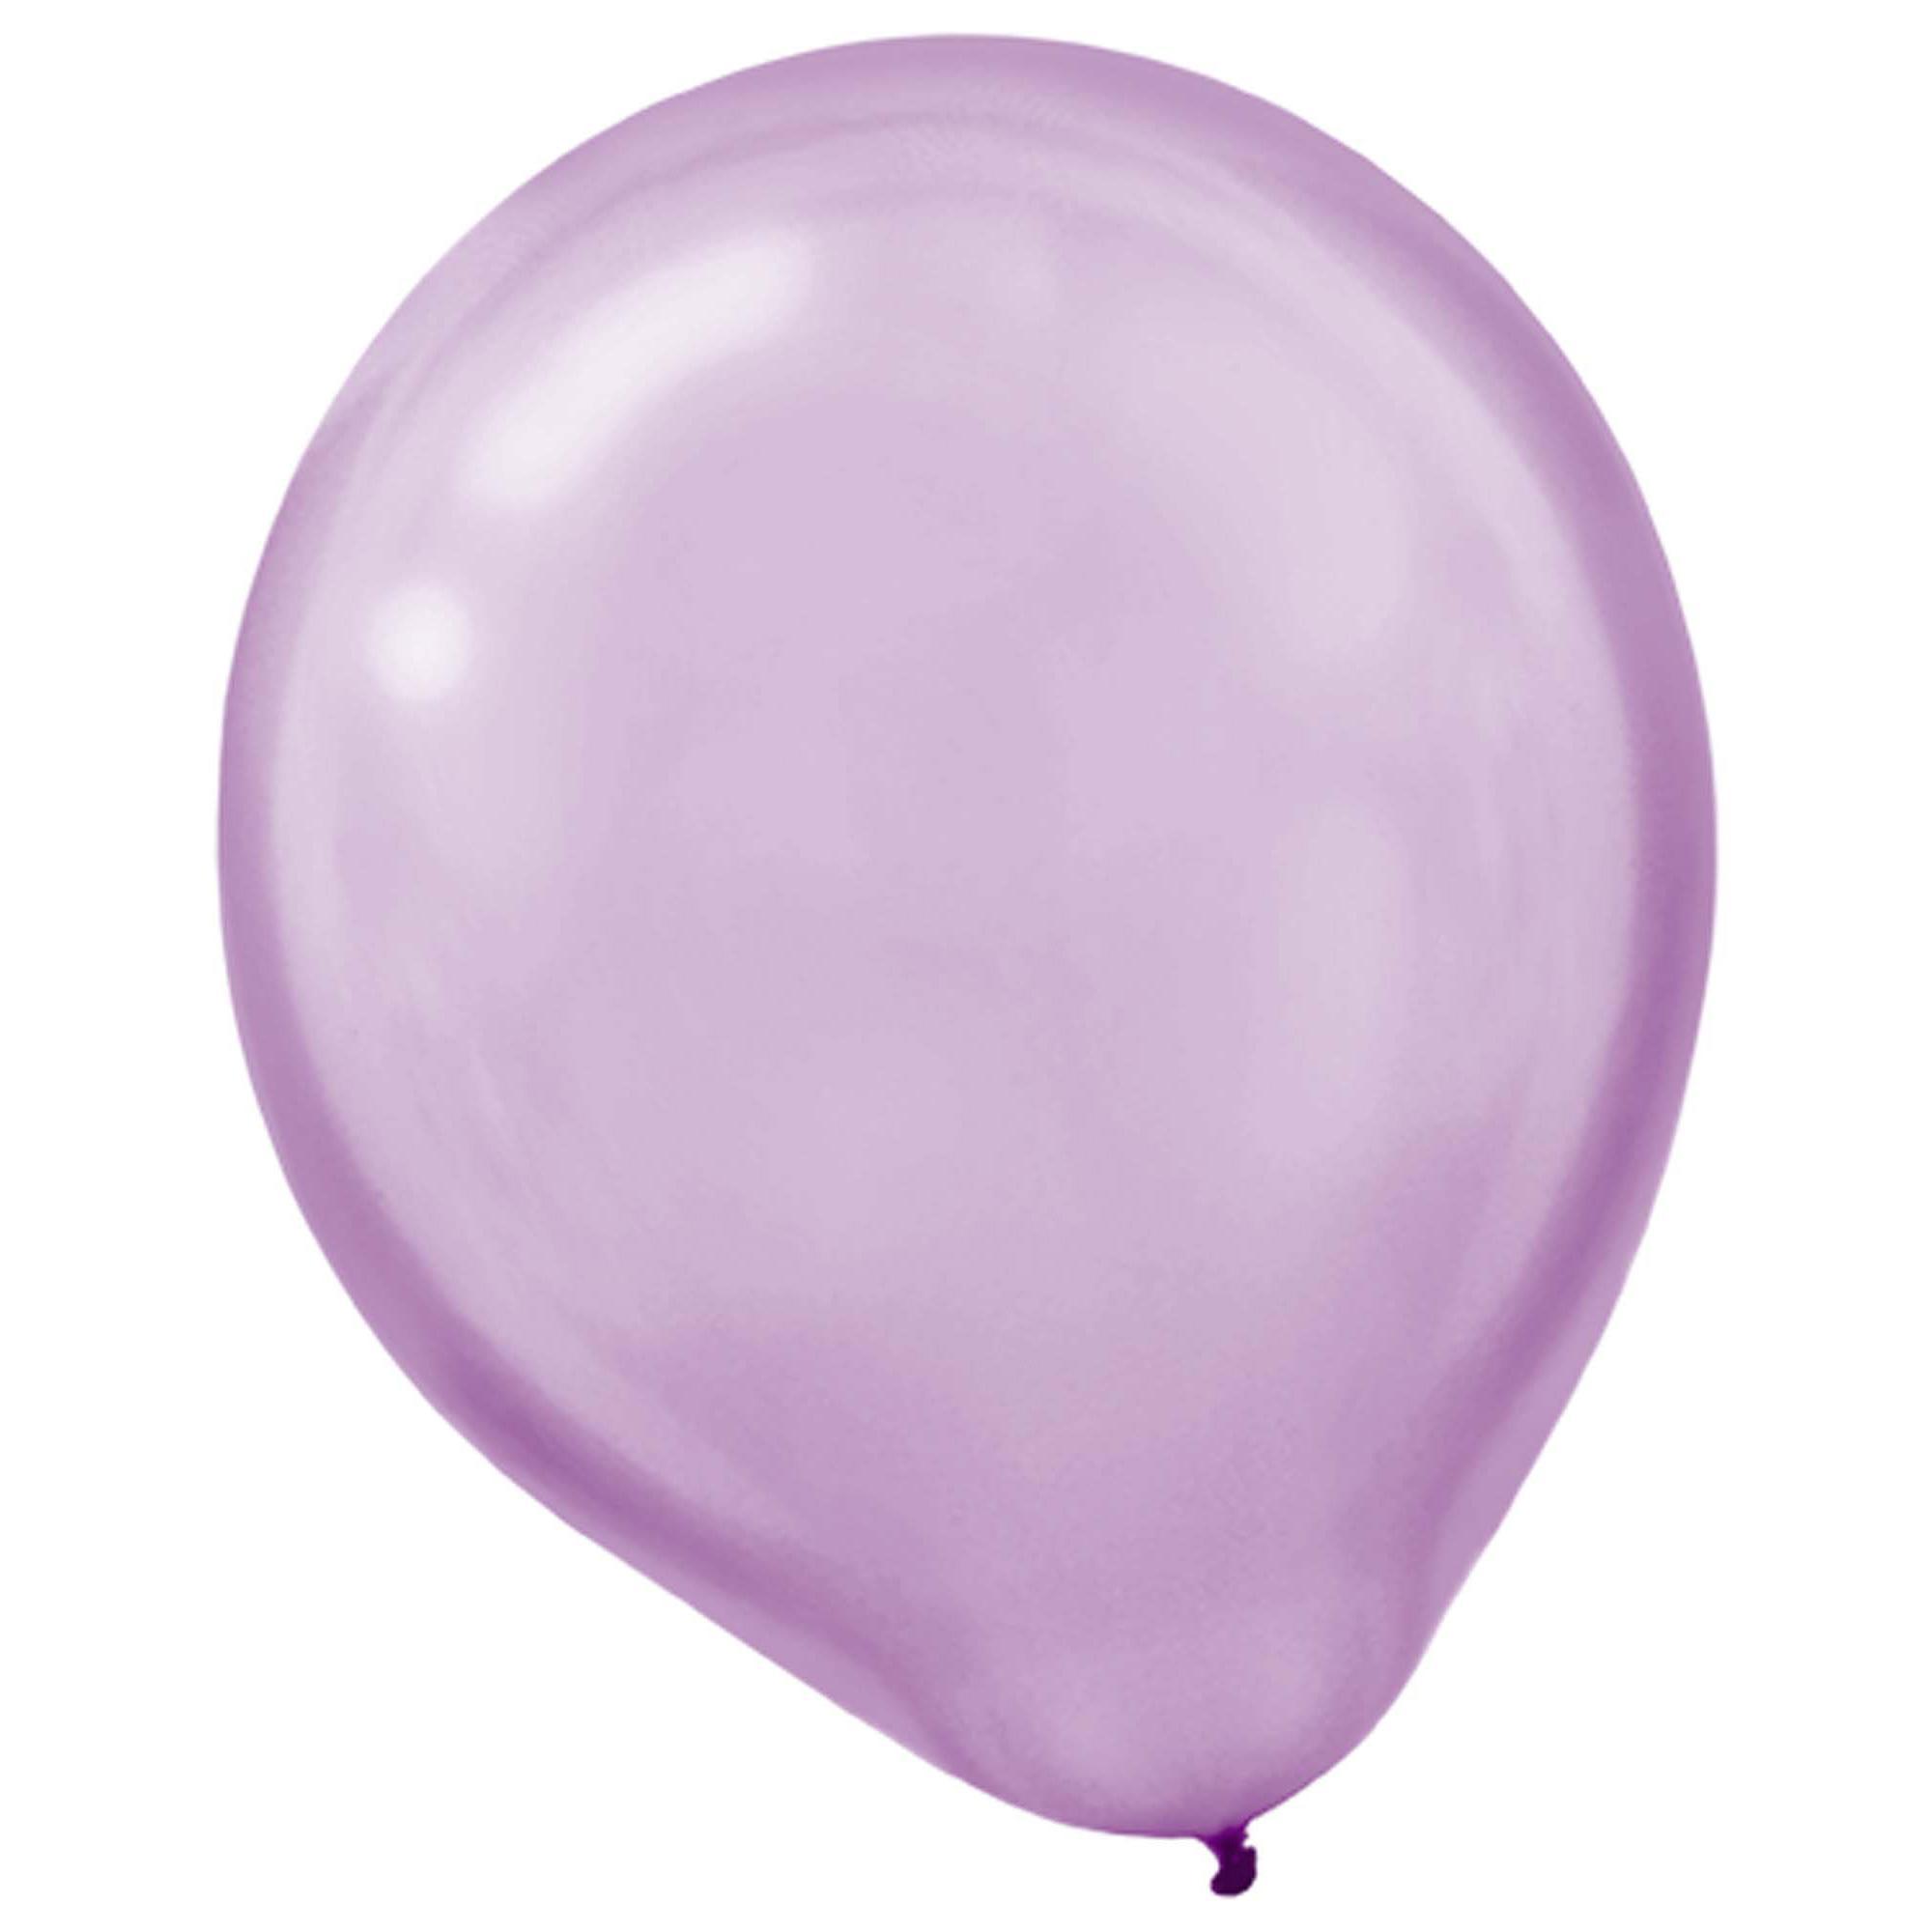 Lavender Pearlized Latex Balloons 12in, 15pcs Balloons & Streamers - Party Centre